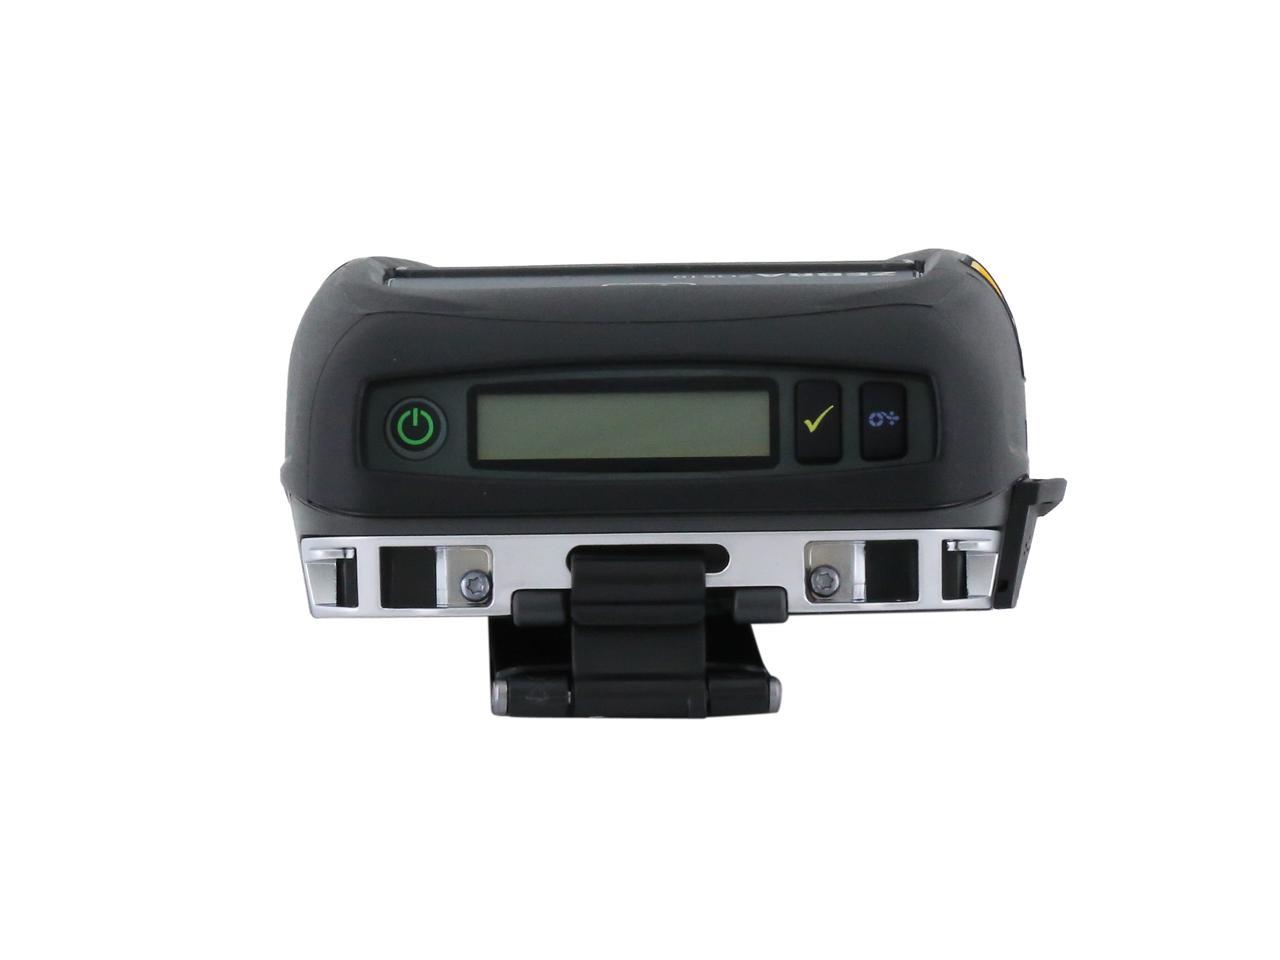 Zebra Zq510 3 Mobile Direct Thermal Receipt And Label Printer 203 Dpi Bluetooth 40 Linered 4423